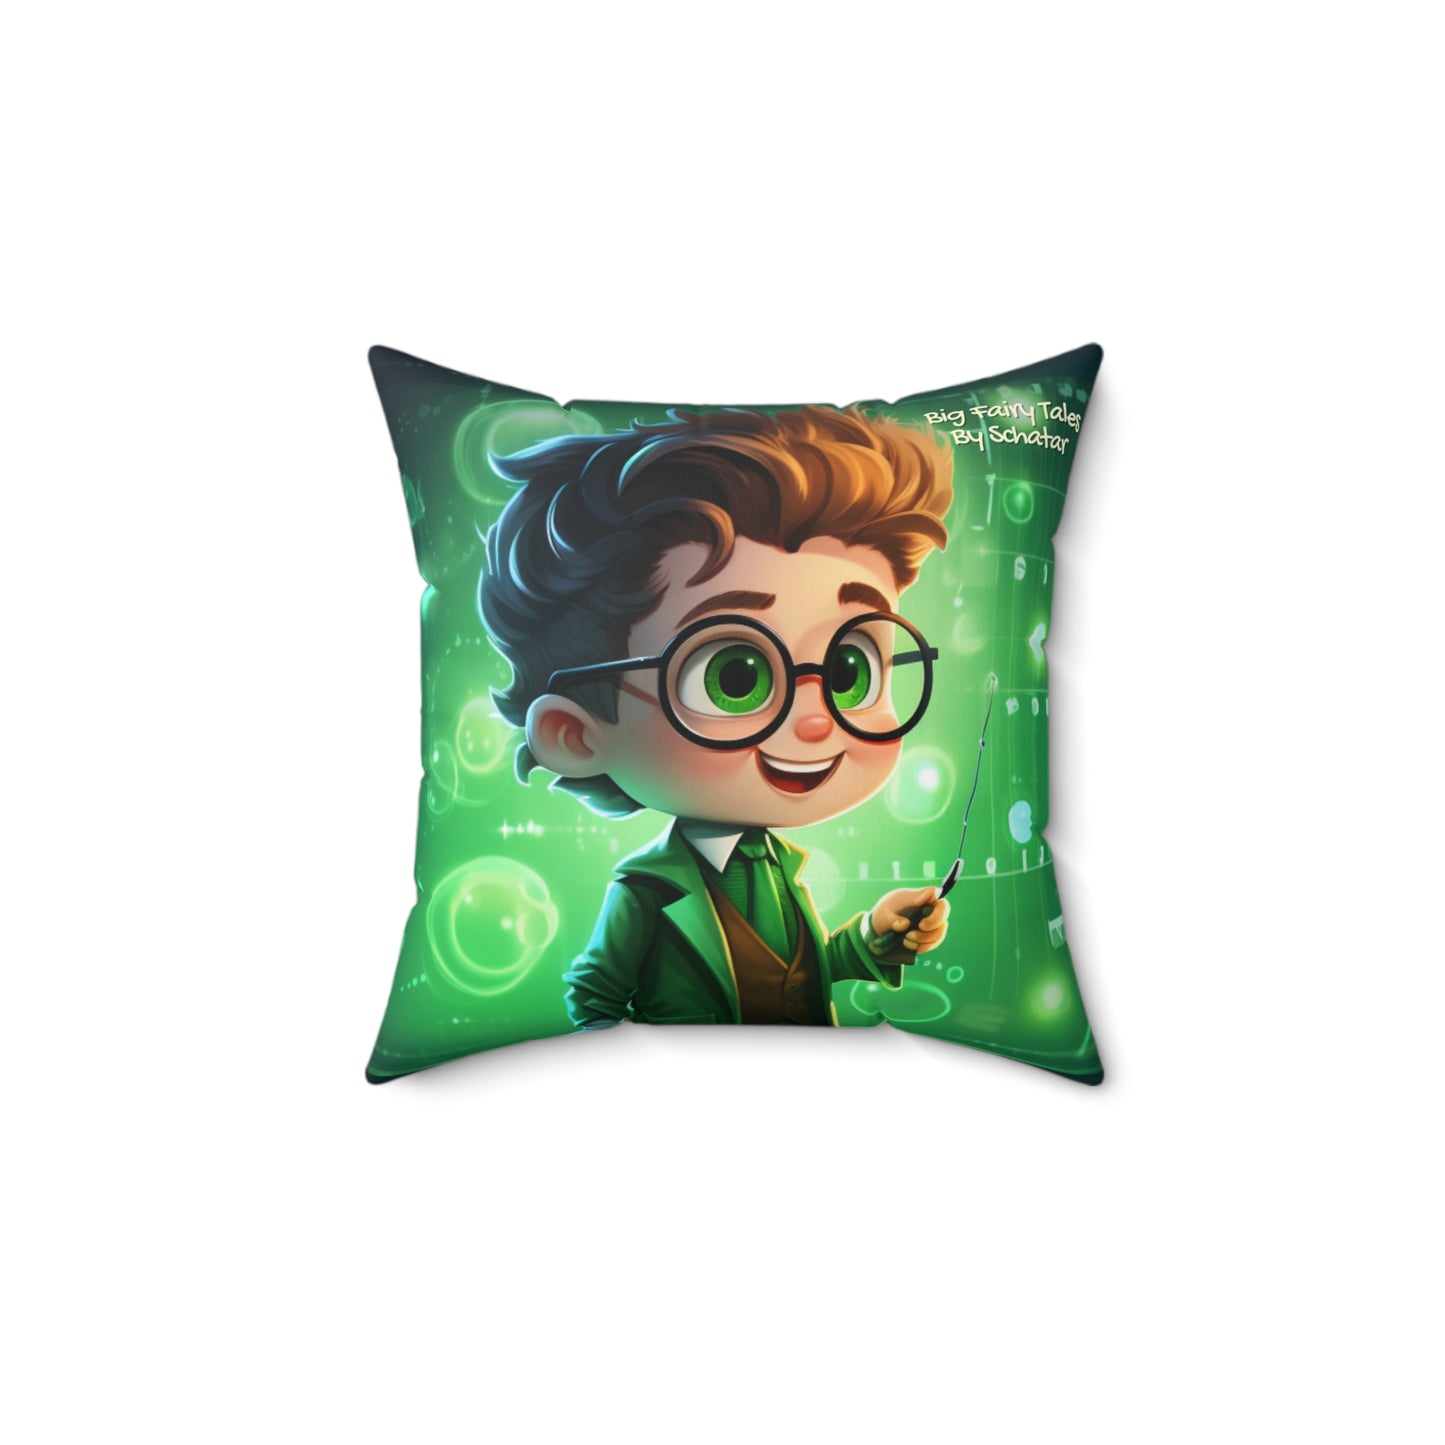 Professor - Big Little Professionals Plush Pillow 11 From Big Fairy Tales By Schatar